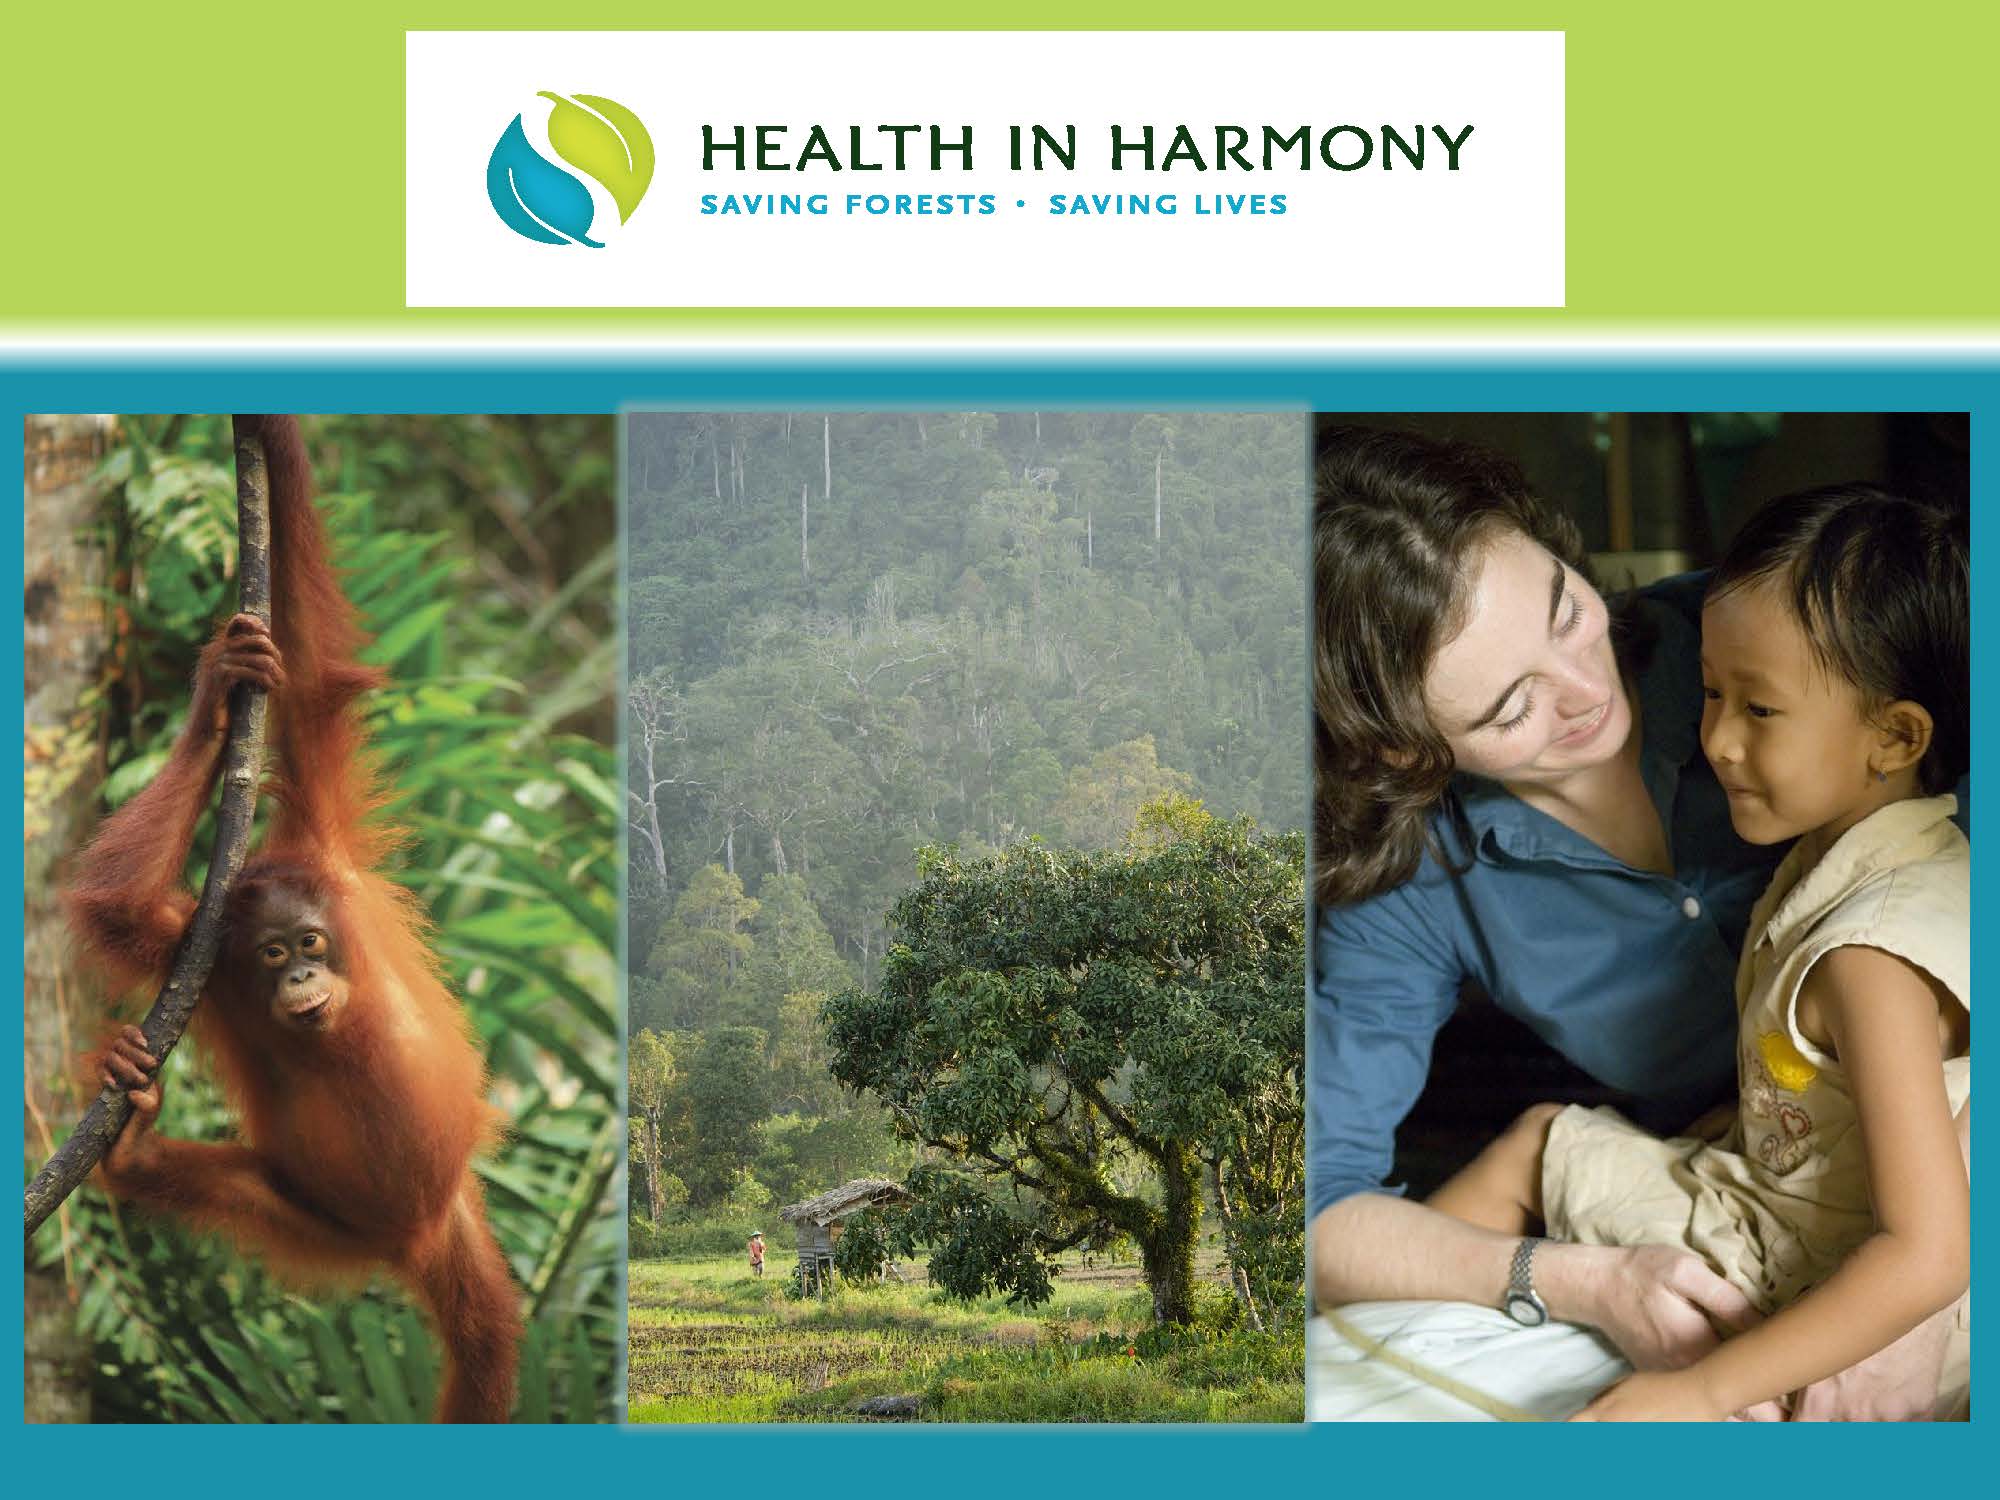 ONE HEALTH 2016 mentoring trip to Borneo